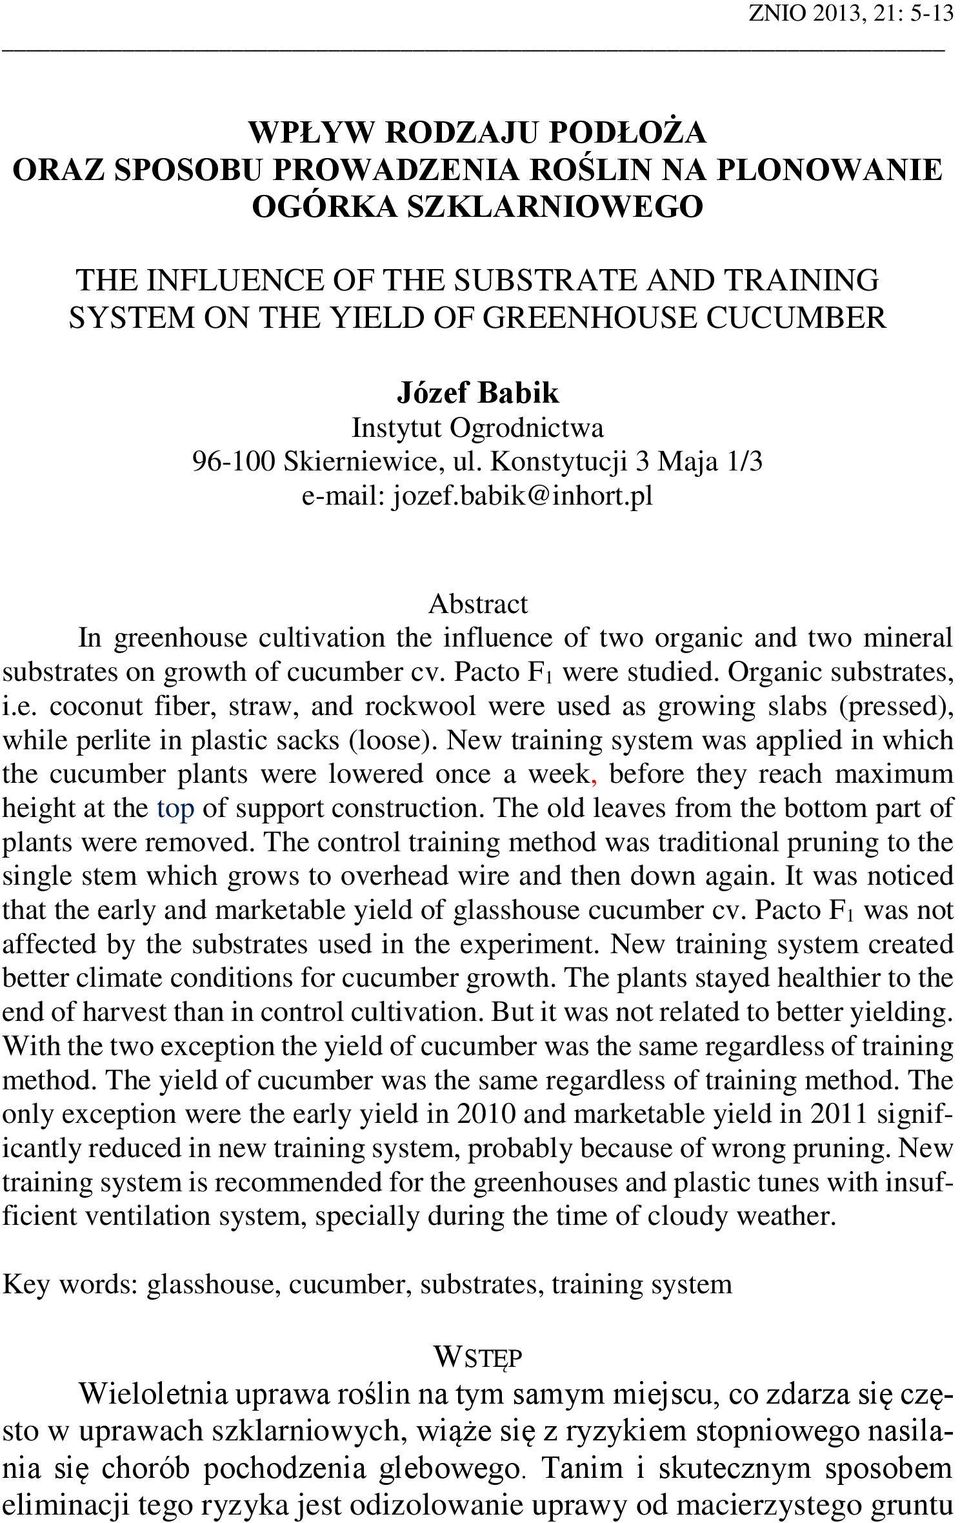 pl Abstract In greenhouse cultivation the influence of two organic and two mineral substrates on growth of cucumber cv. Pacto F 1 were studied. Organic substrates, i.e. coconut fiber, straw, and rockwool were used as growing slabs (pressed), while perlite in plastic sacks (loose).